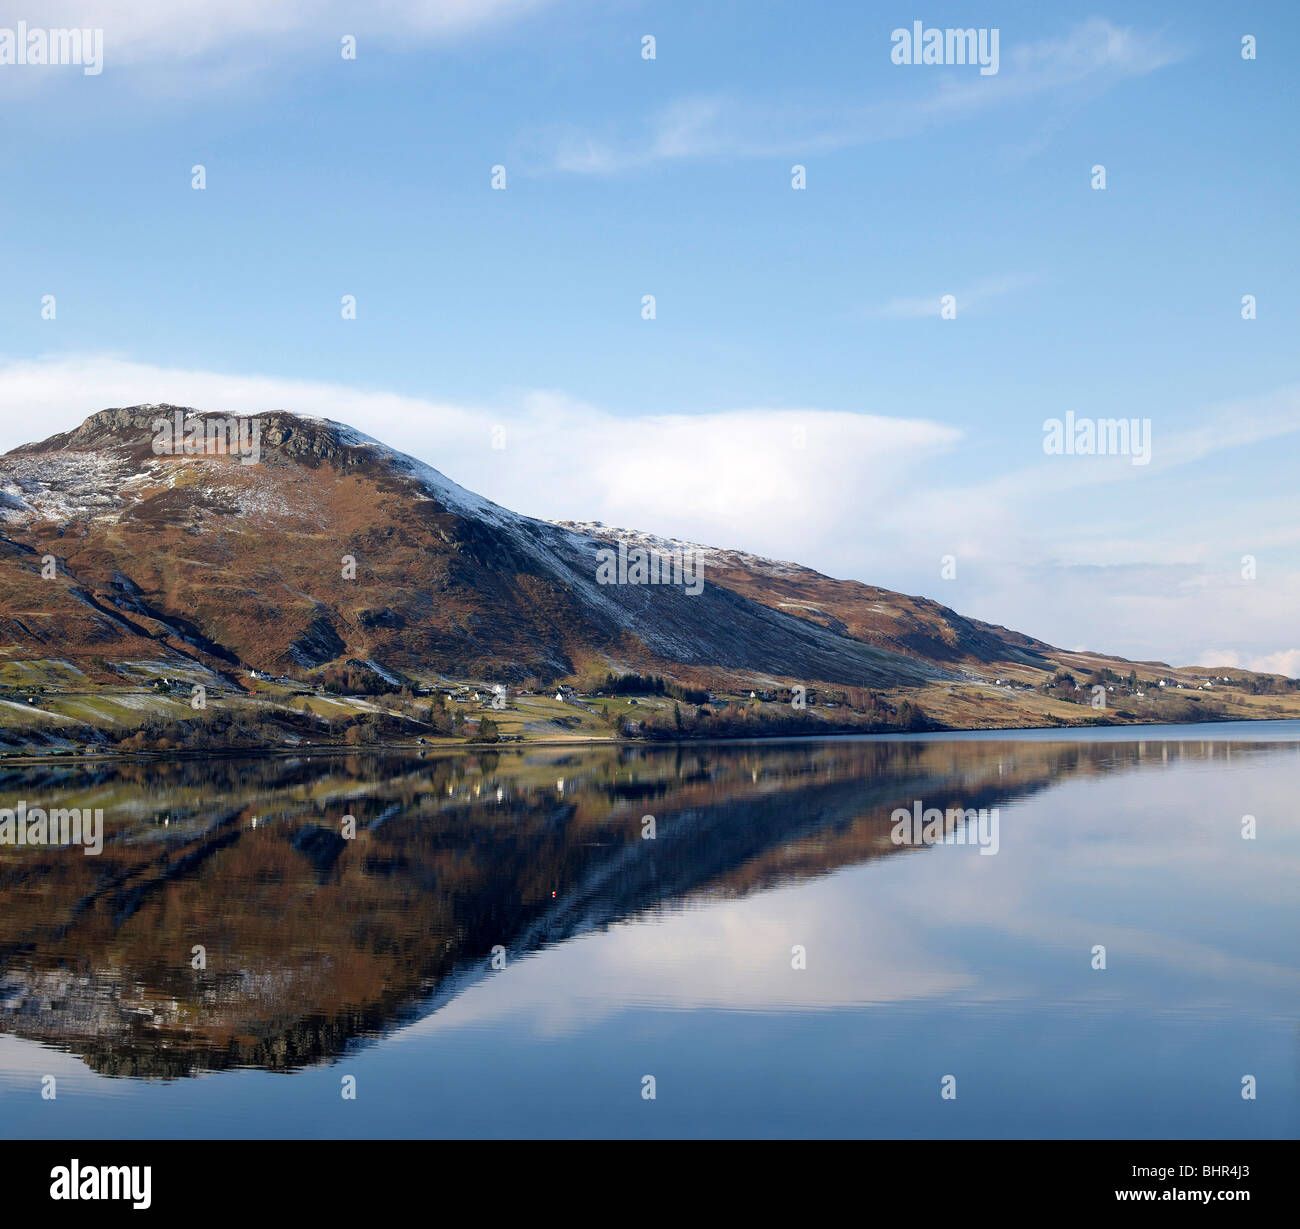 Mirror image of the south side of Loch Broom, Ullapool, North West Scotland Stock Photo